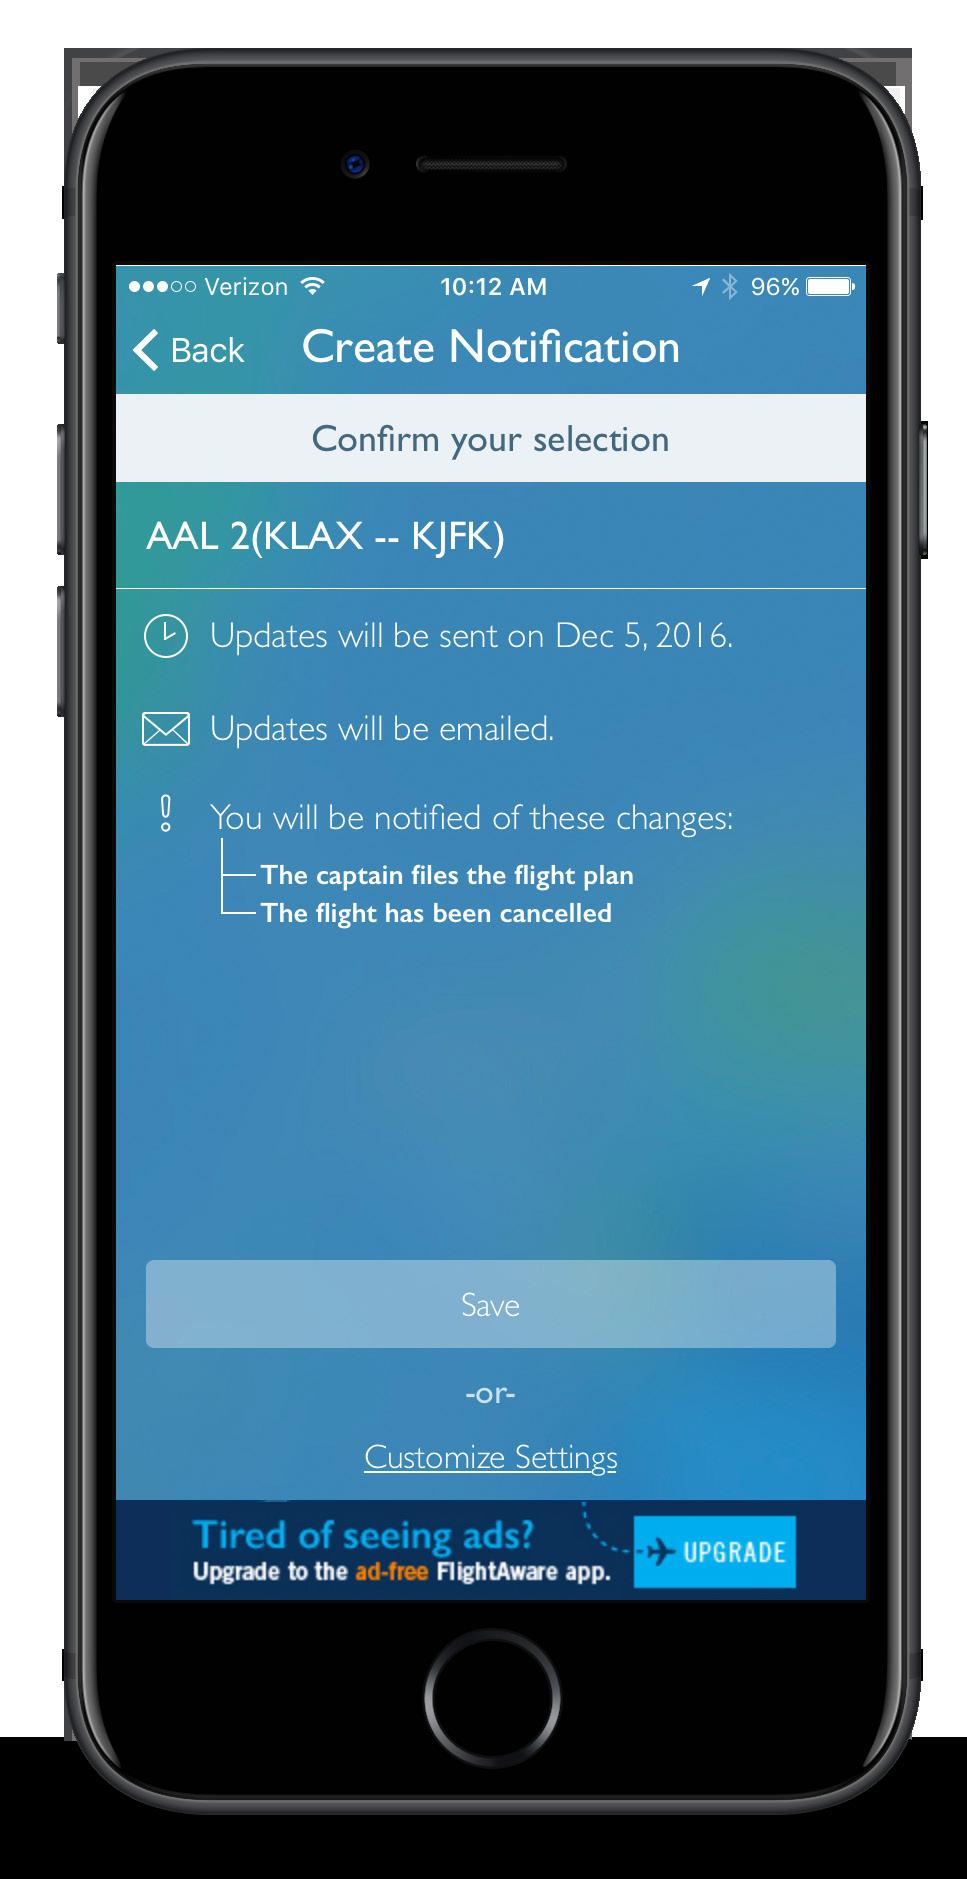 type, or airport origin/destination Size: 70/249 character max for mobile text/email Tracking: Alert